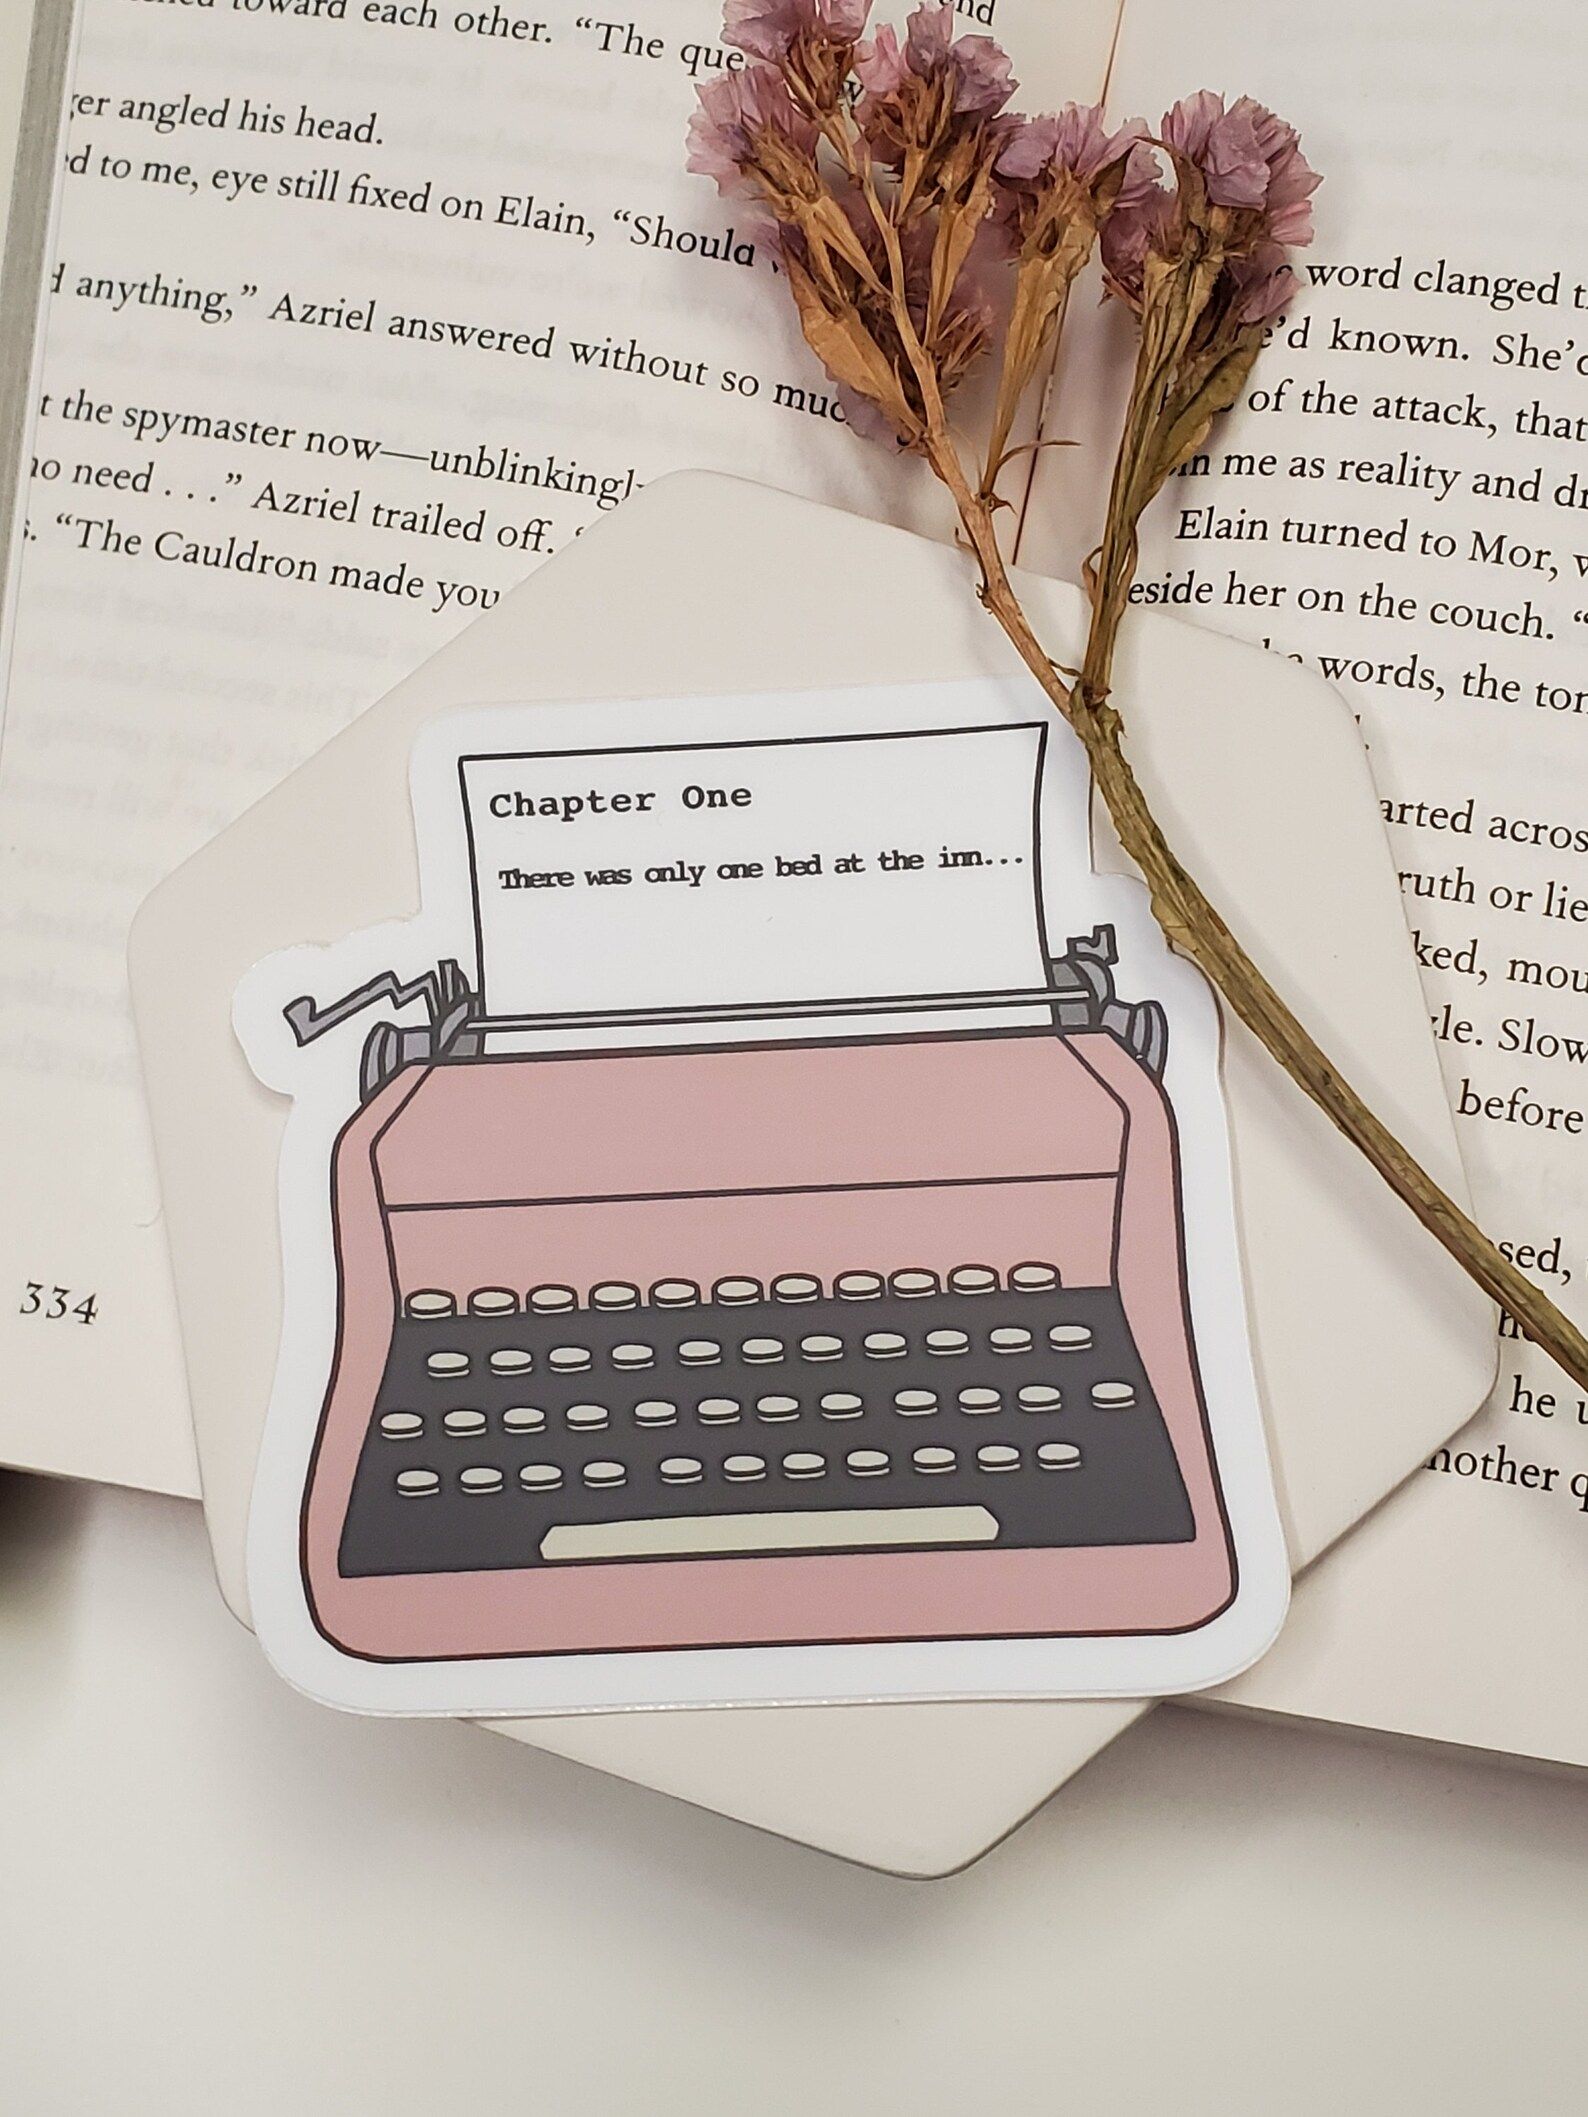 Pink typewriter sticker. The paper inside the typewriter reads "Chapter One: There was only one bed at the inn..."